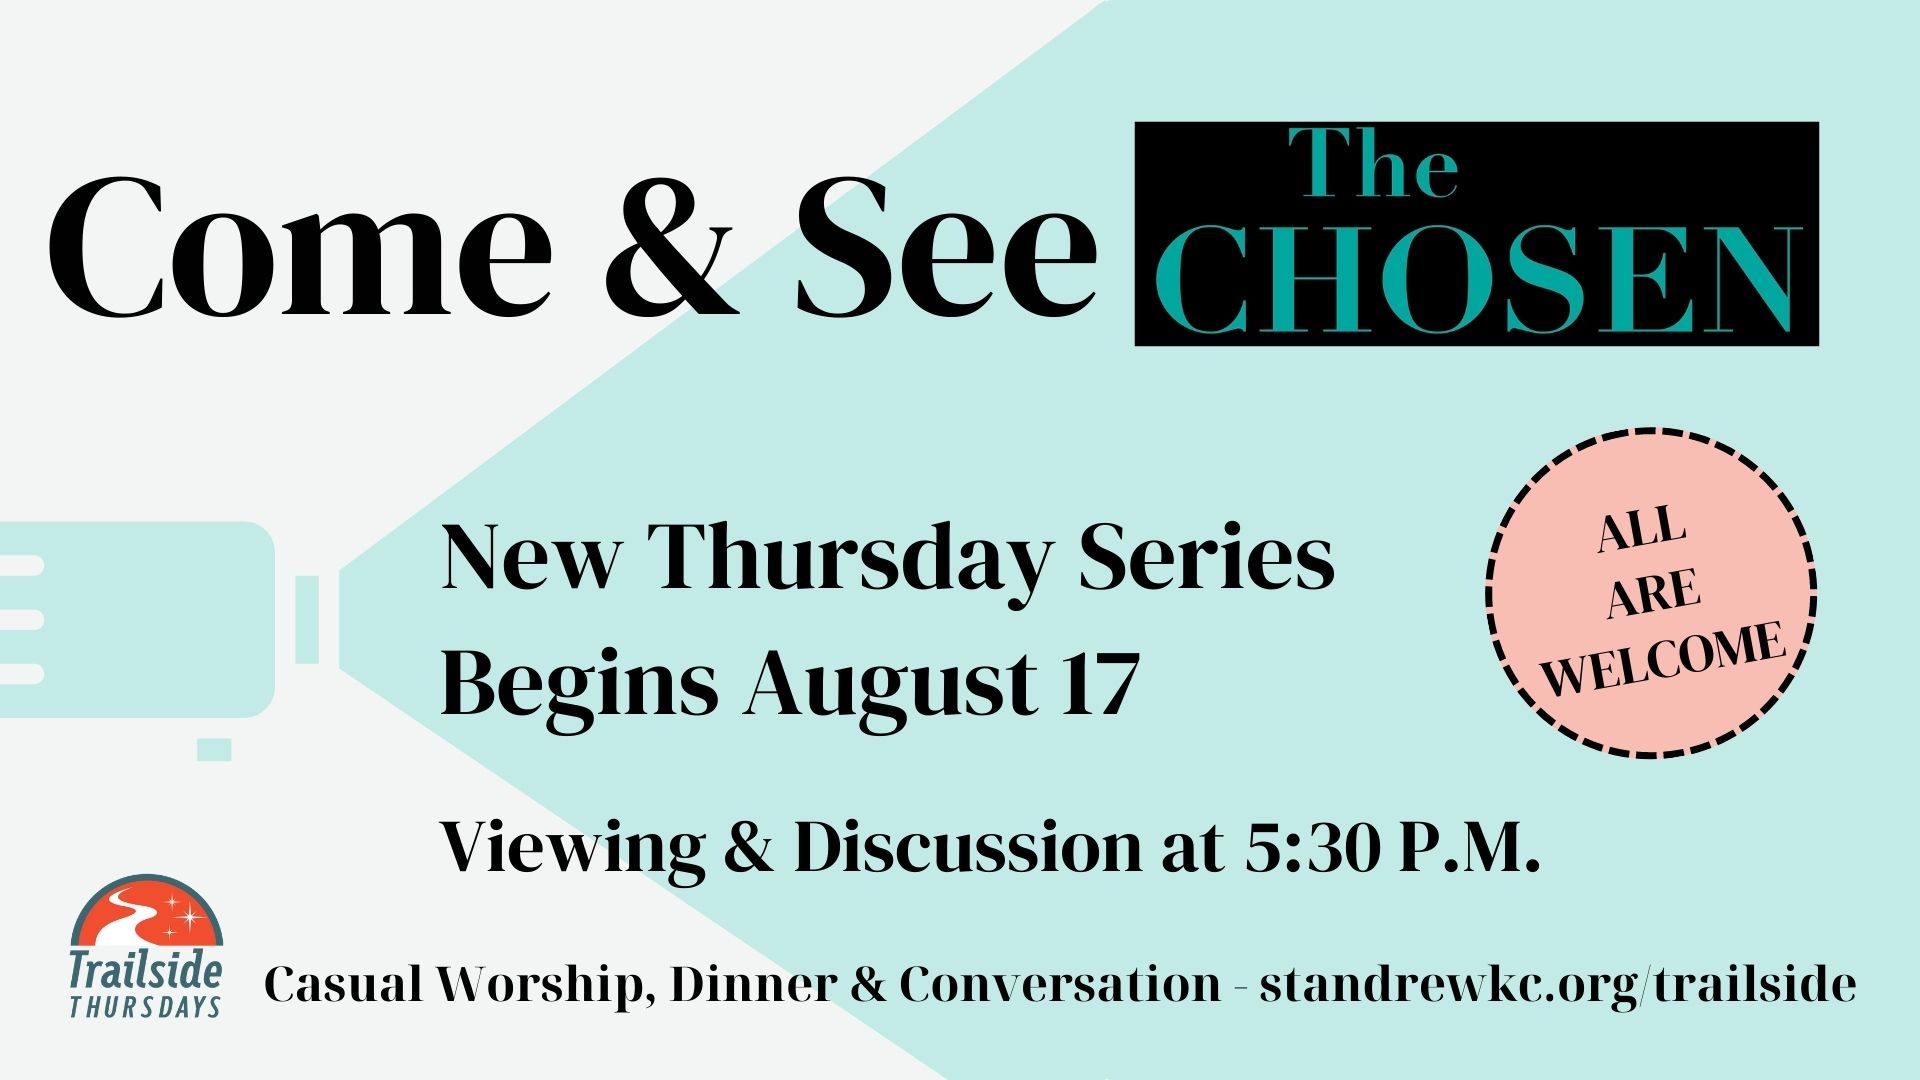 Trailside Thursdays presents The Chosen. View and discuss the first season of the show.